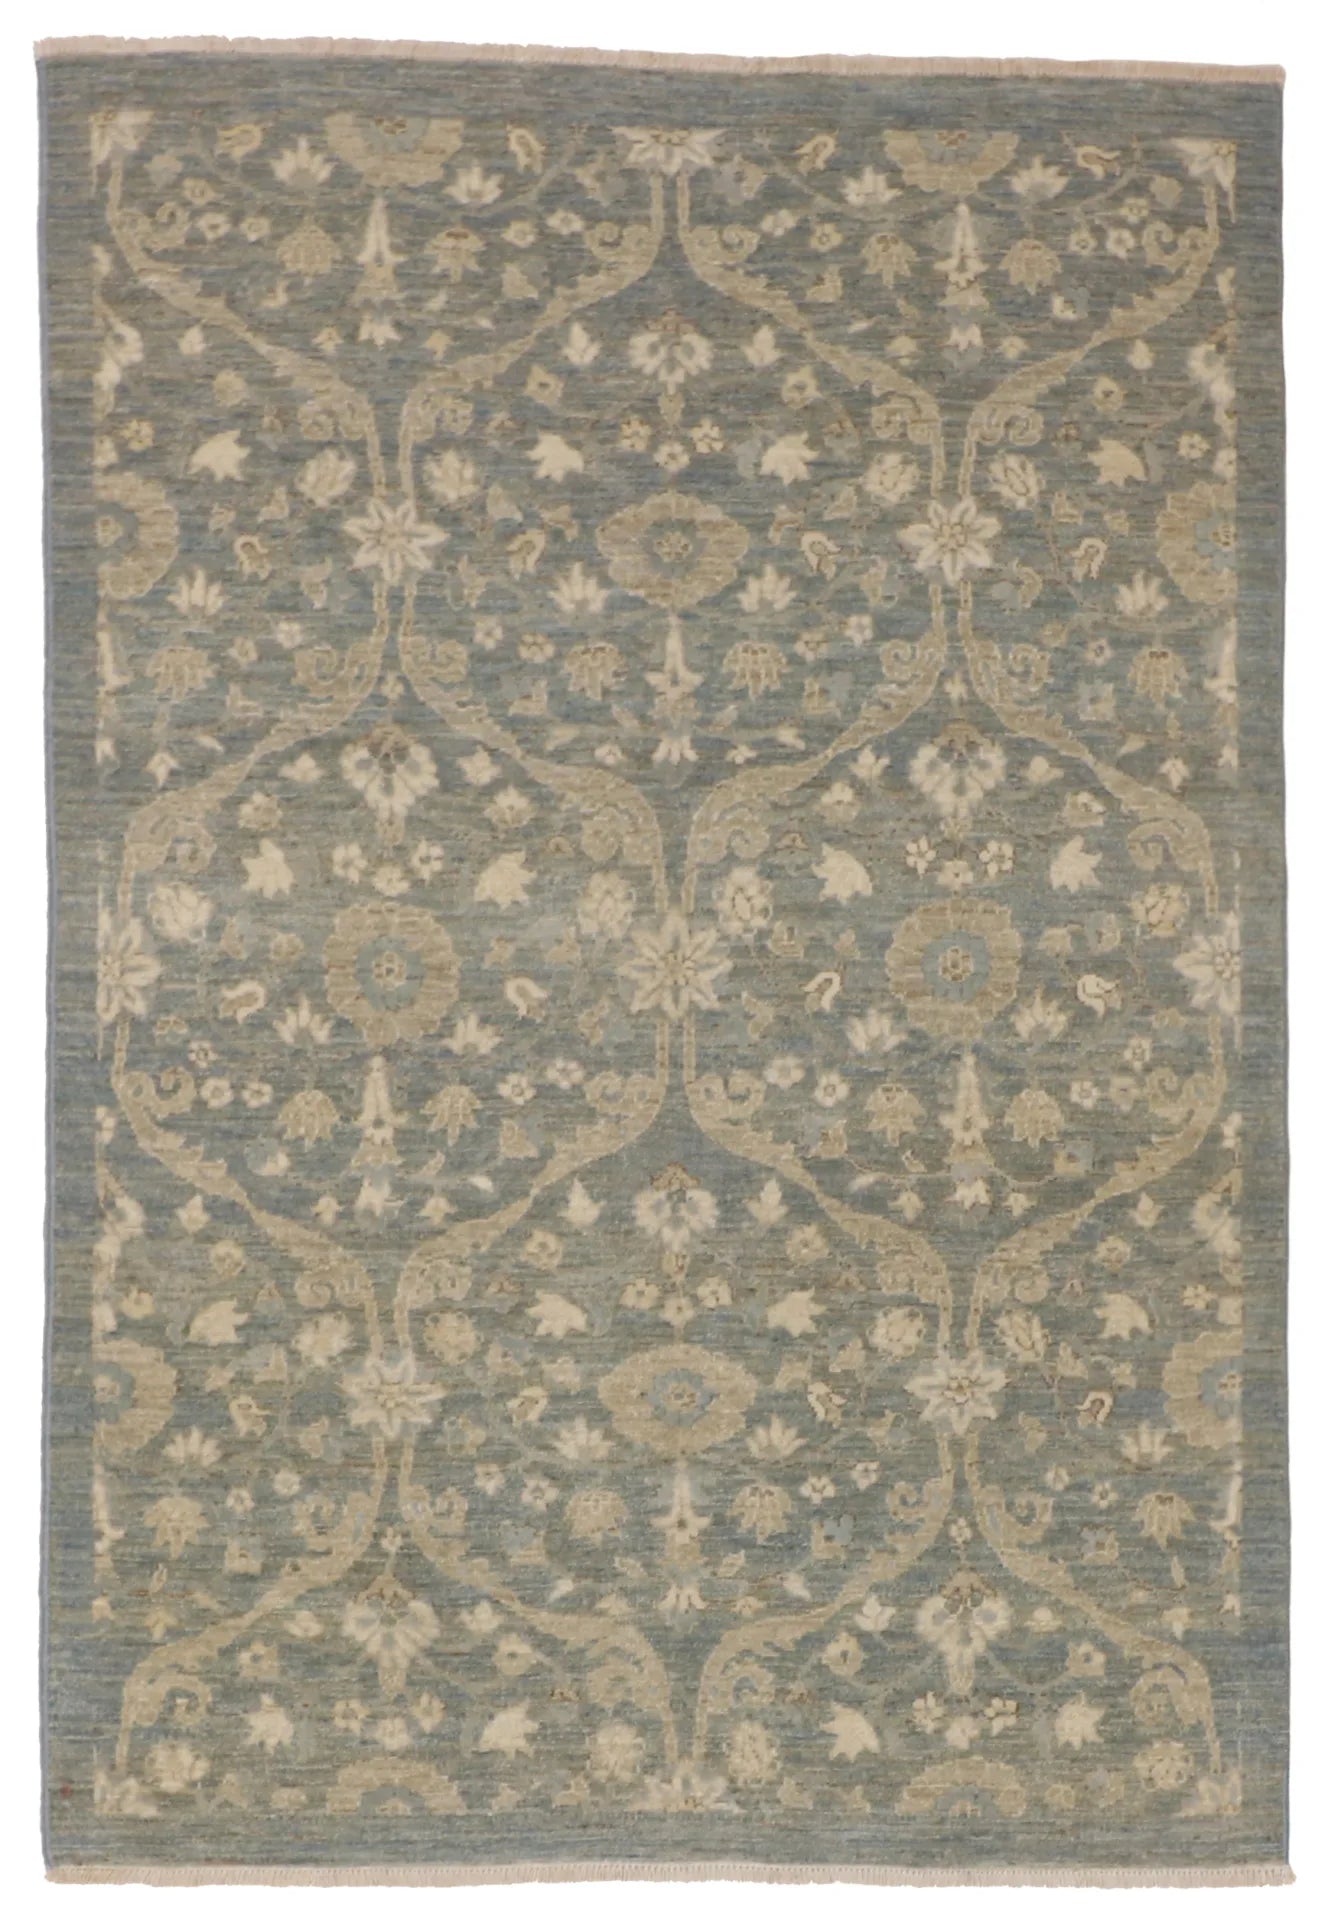 4.2x6 - Mahal Fine/Wool All Over Rectangle - Hand Knotted Rug